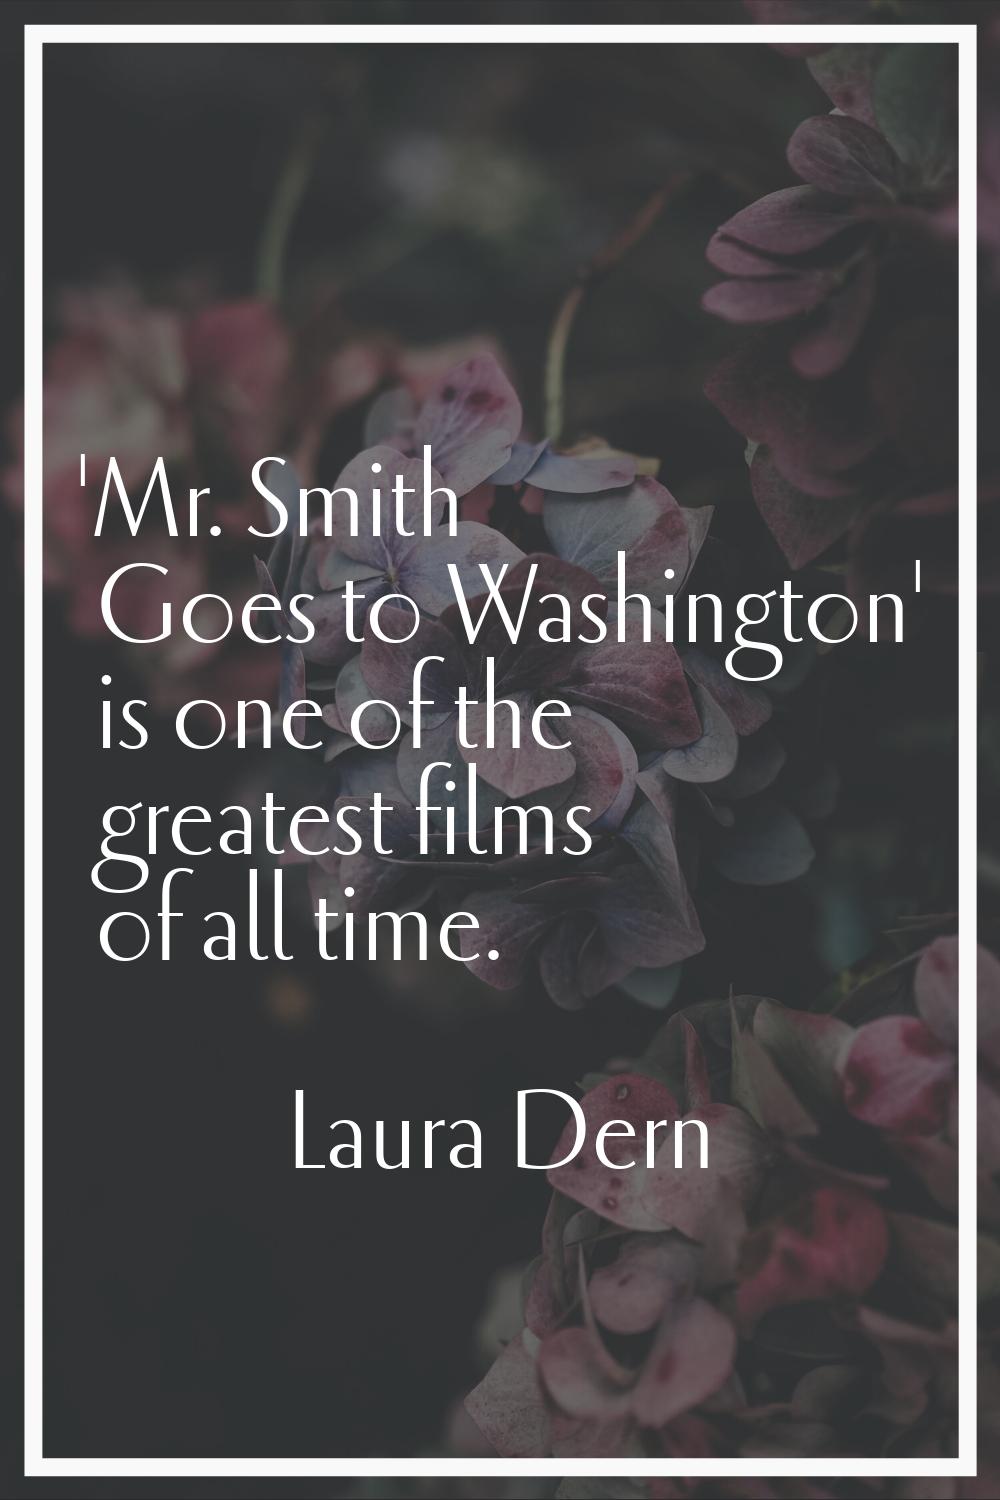 'Mr. Smith Goes to Washington' is one of the greatest films of all time.